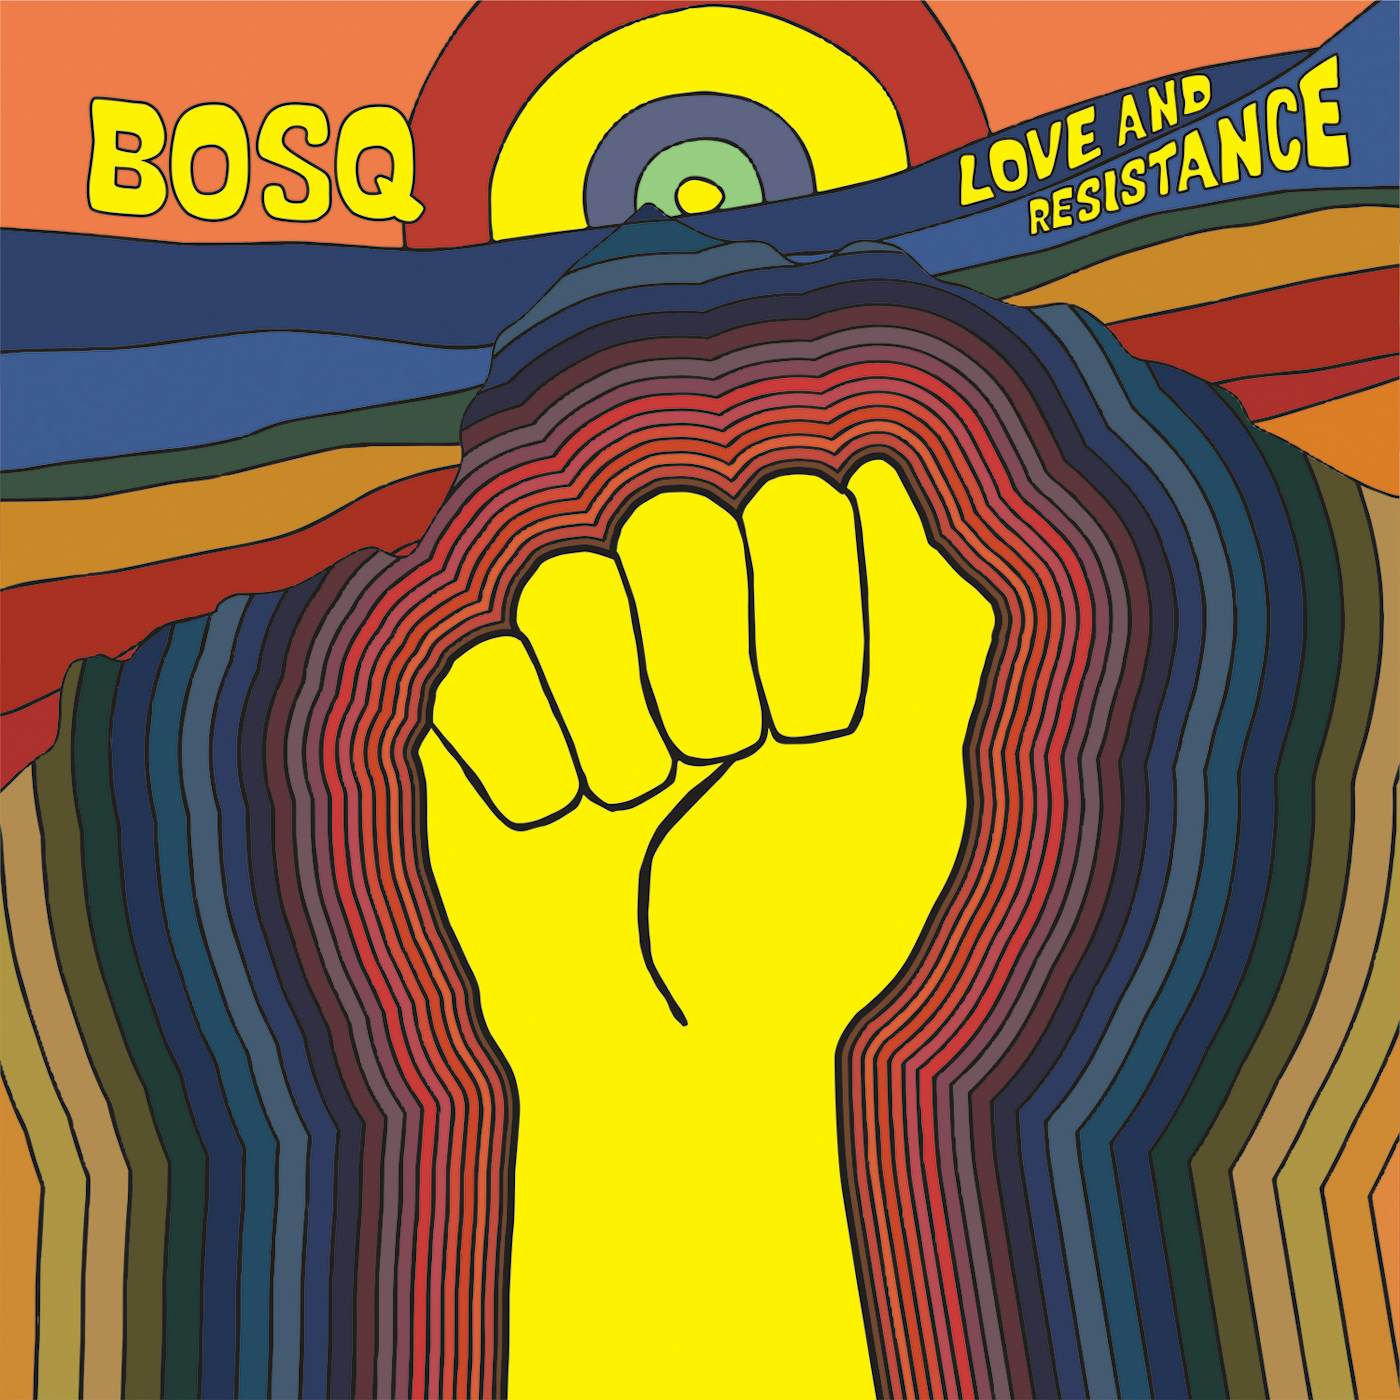 Bosq Of Whiskey Barons LOVE & RESISTANCE CD